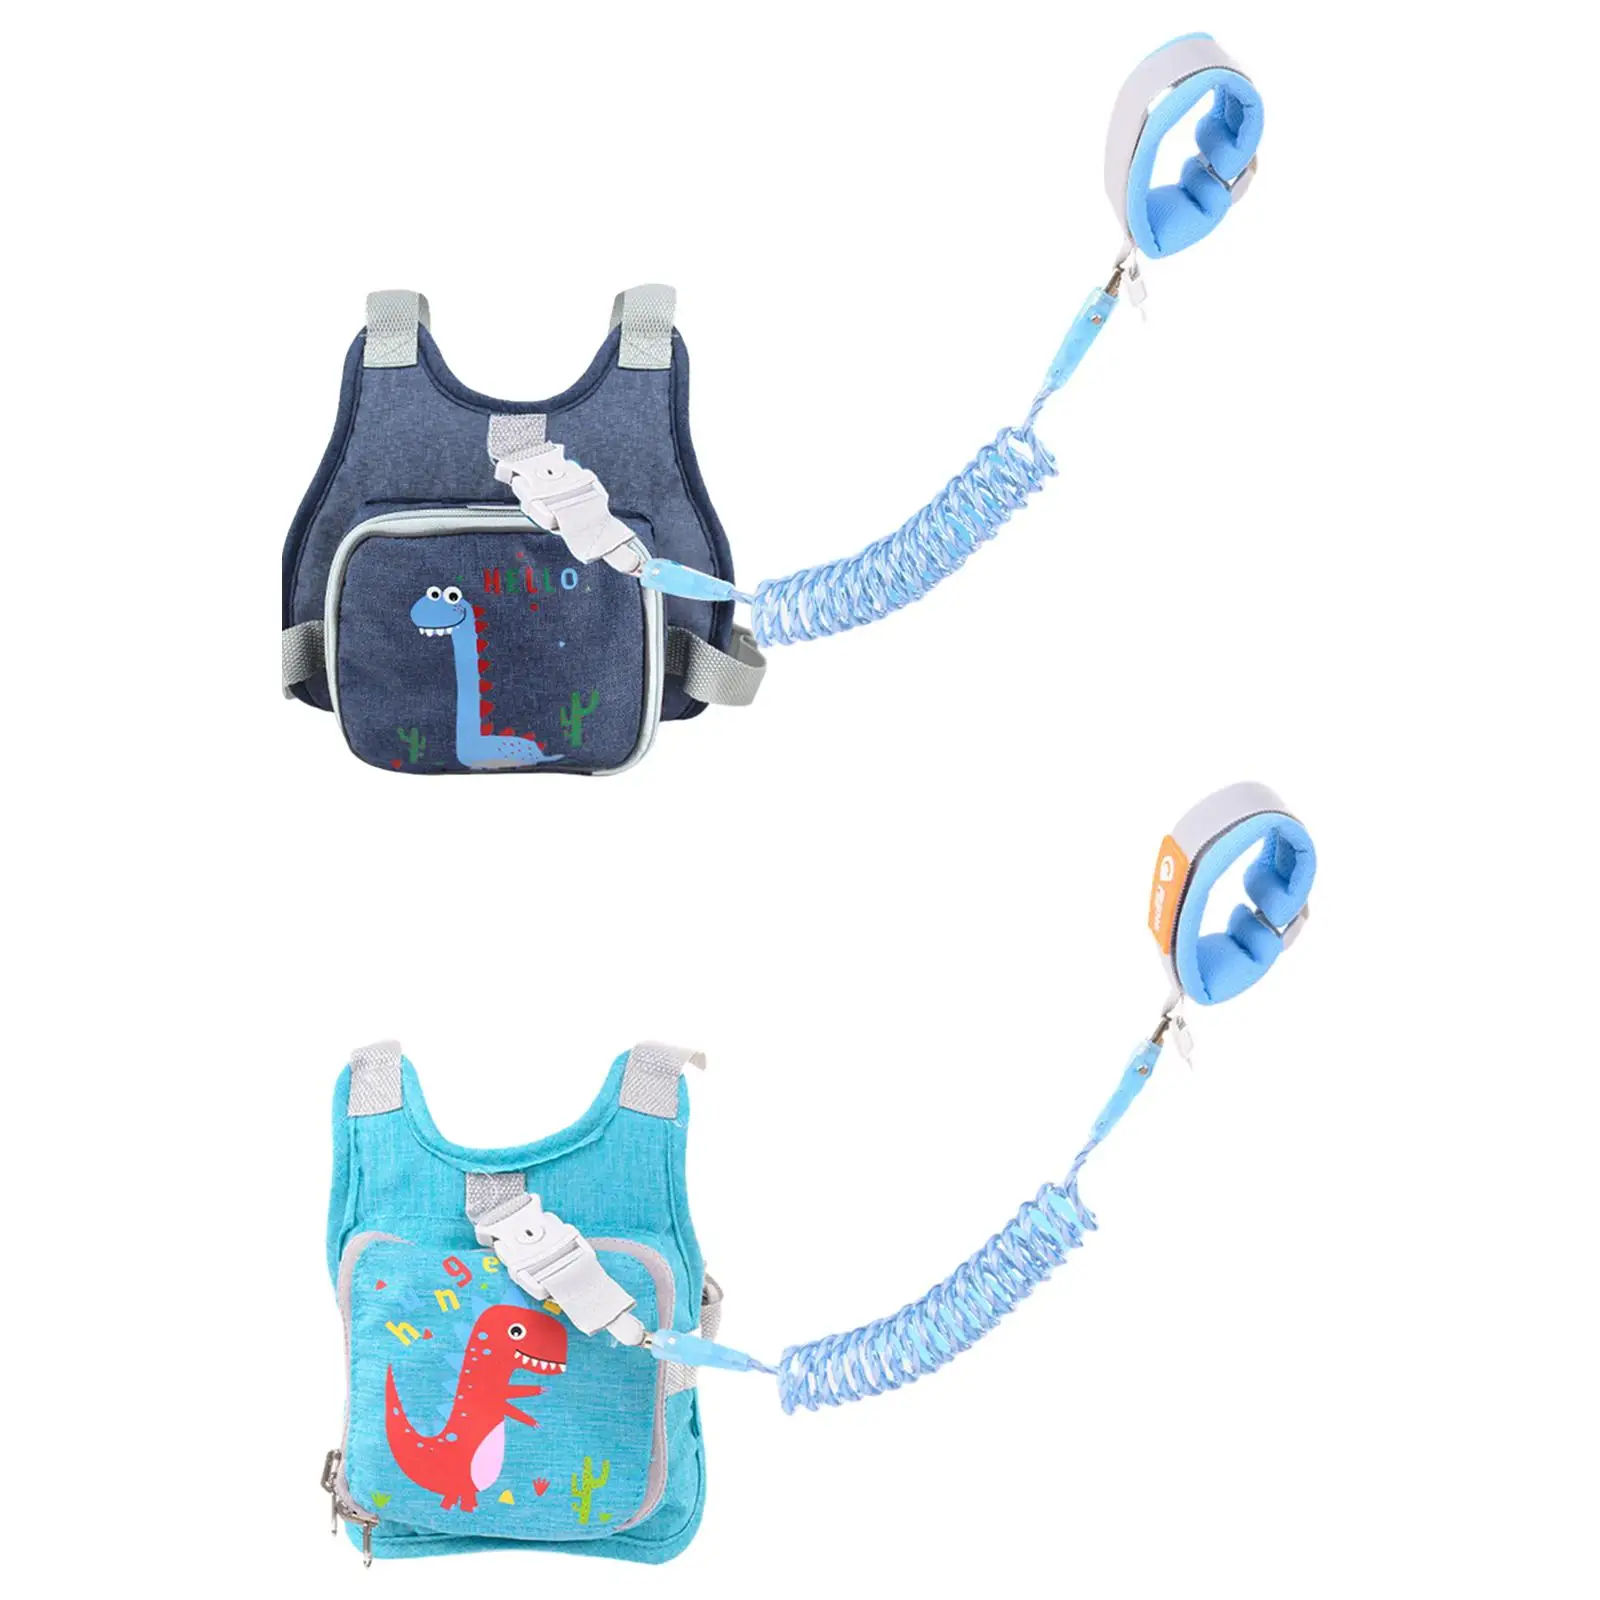 Toddlers Harness Leash Adjustable Shoulder Strap Comfortable Toddlers Leash for Outdoor Walking Shopping Travel Boys Girls